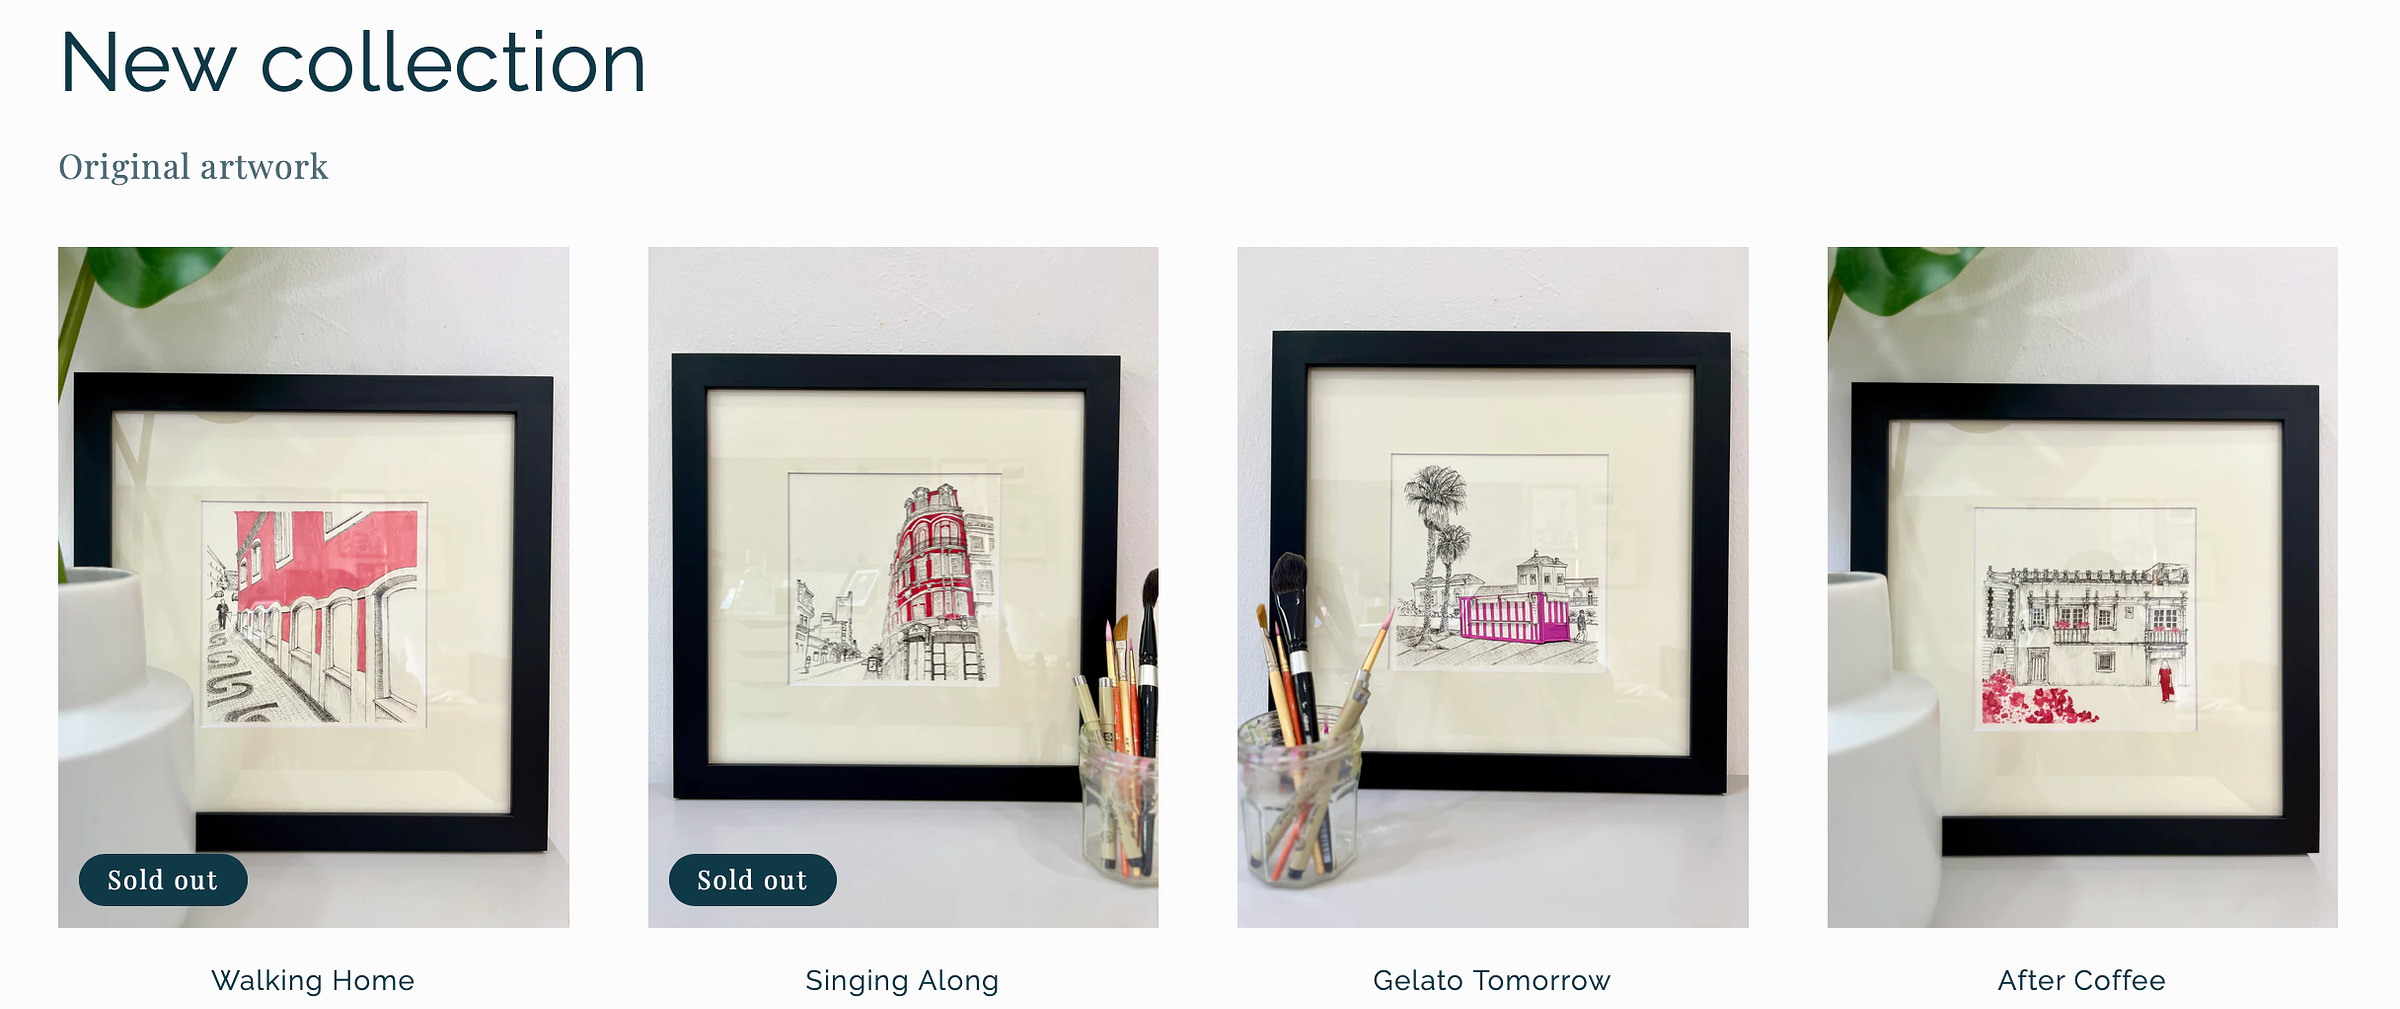 image: screenshot of four line art with acrylic gouache paint featuring urban landscapes of Portugal by artist Melinda Yeoh. The artwork are shown with black frame and cream colour mount